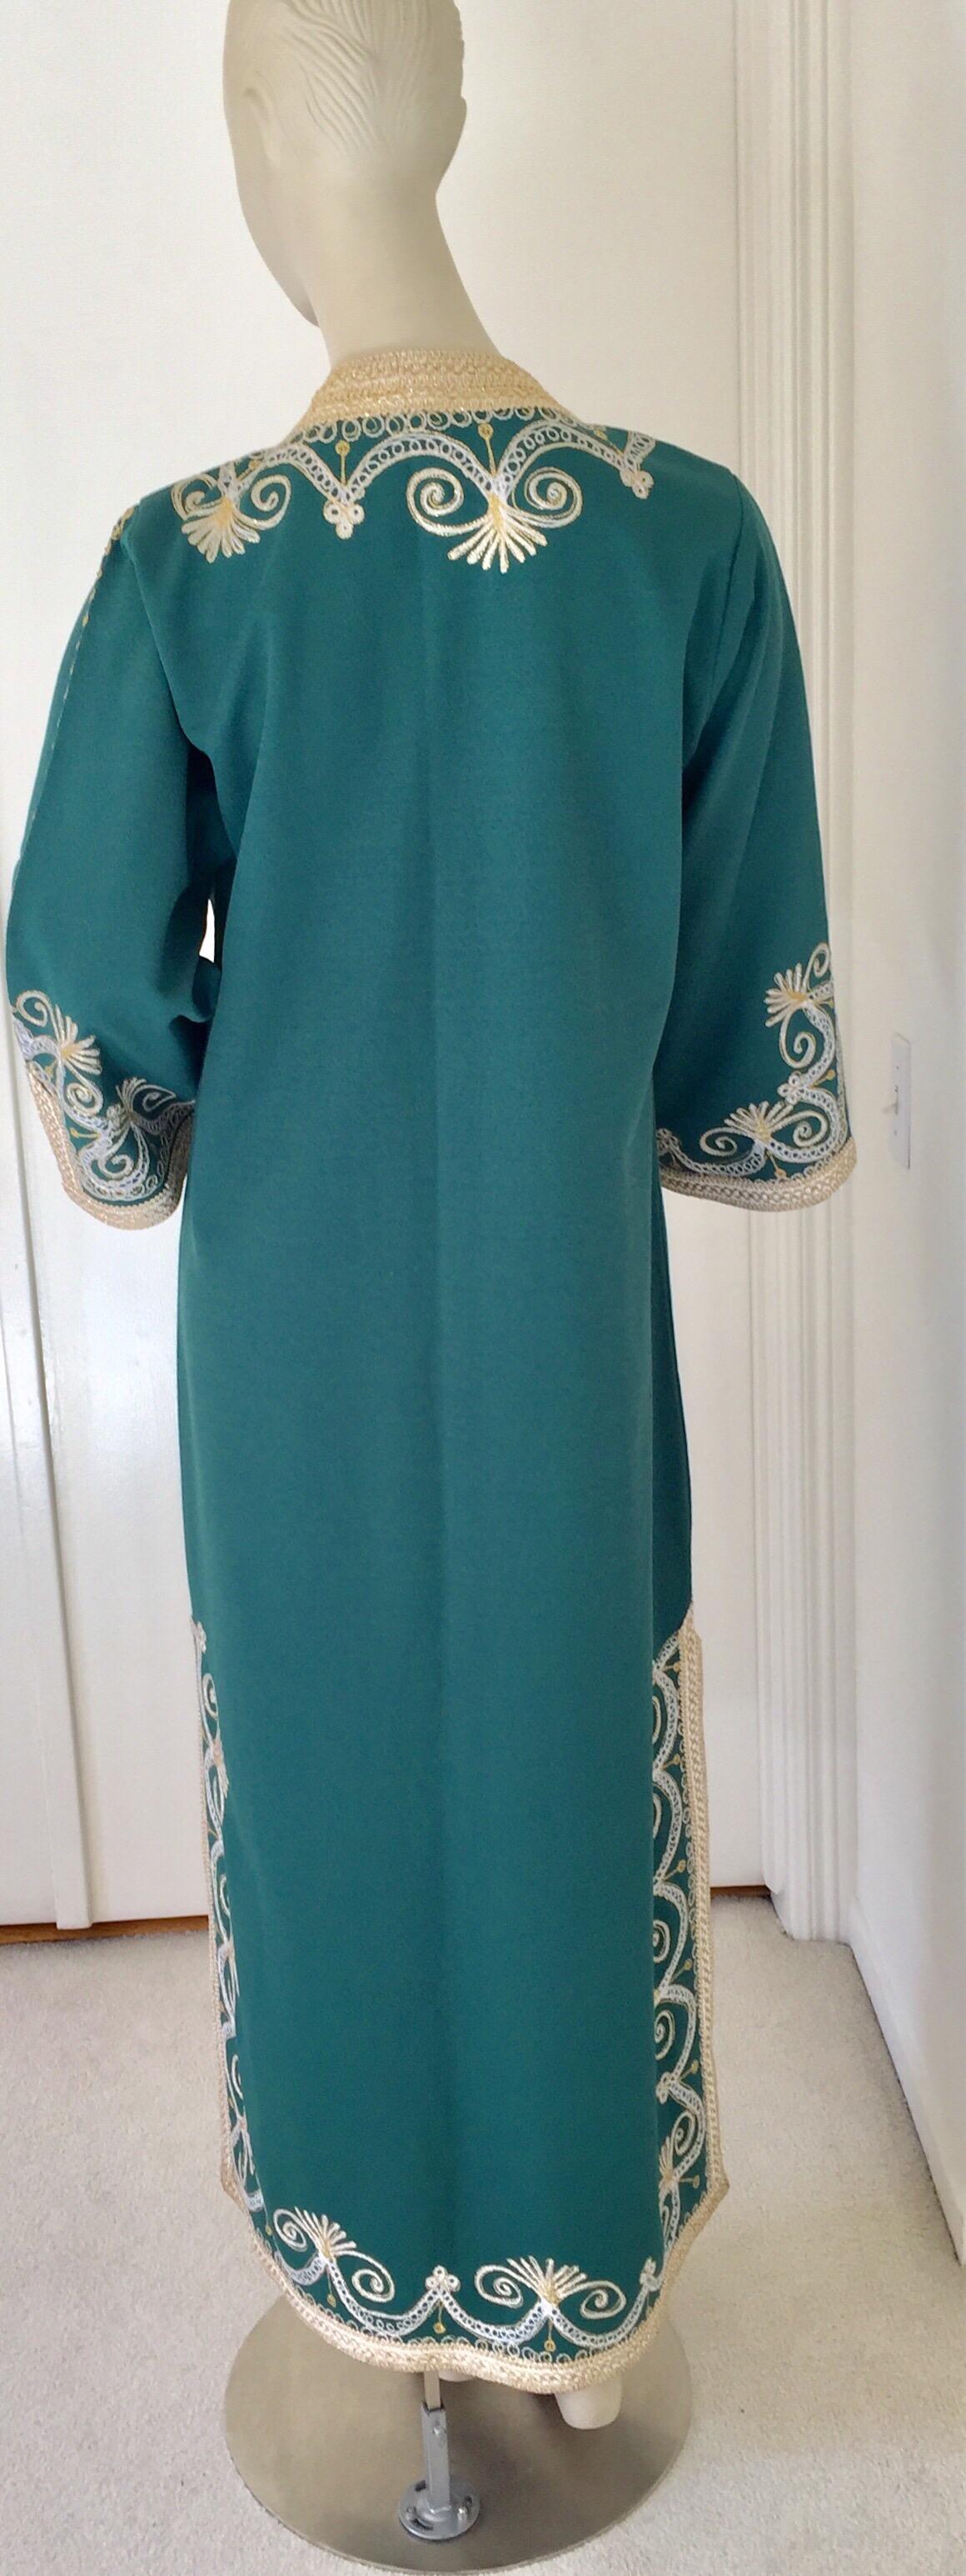 Vintage Moroccan Caftan Emerald Green Maxi Dress, circa 1970 Size M In Good Condition For Sale In North Hollywood, CA